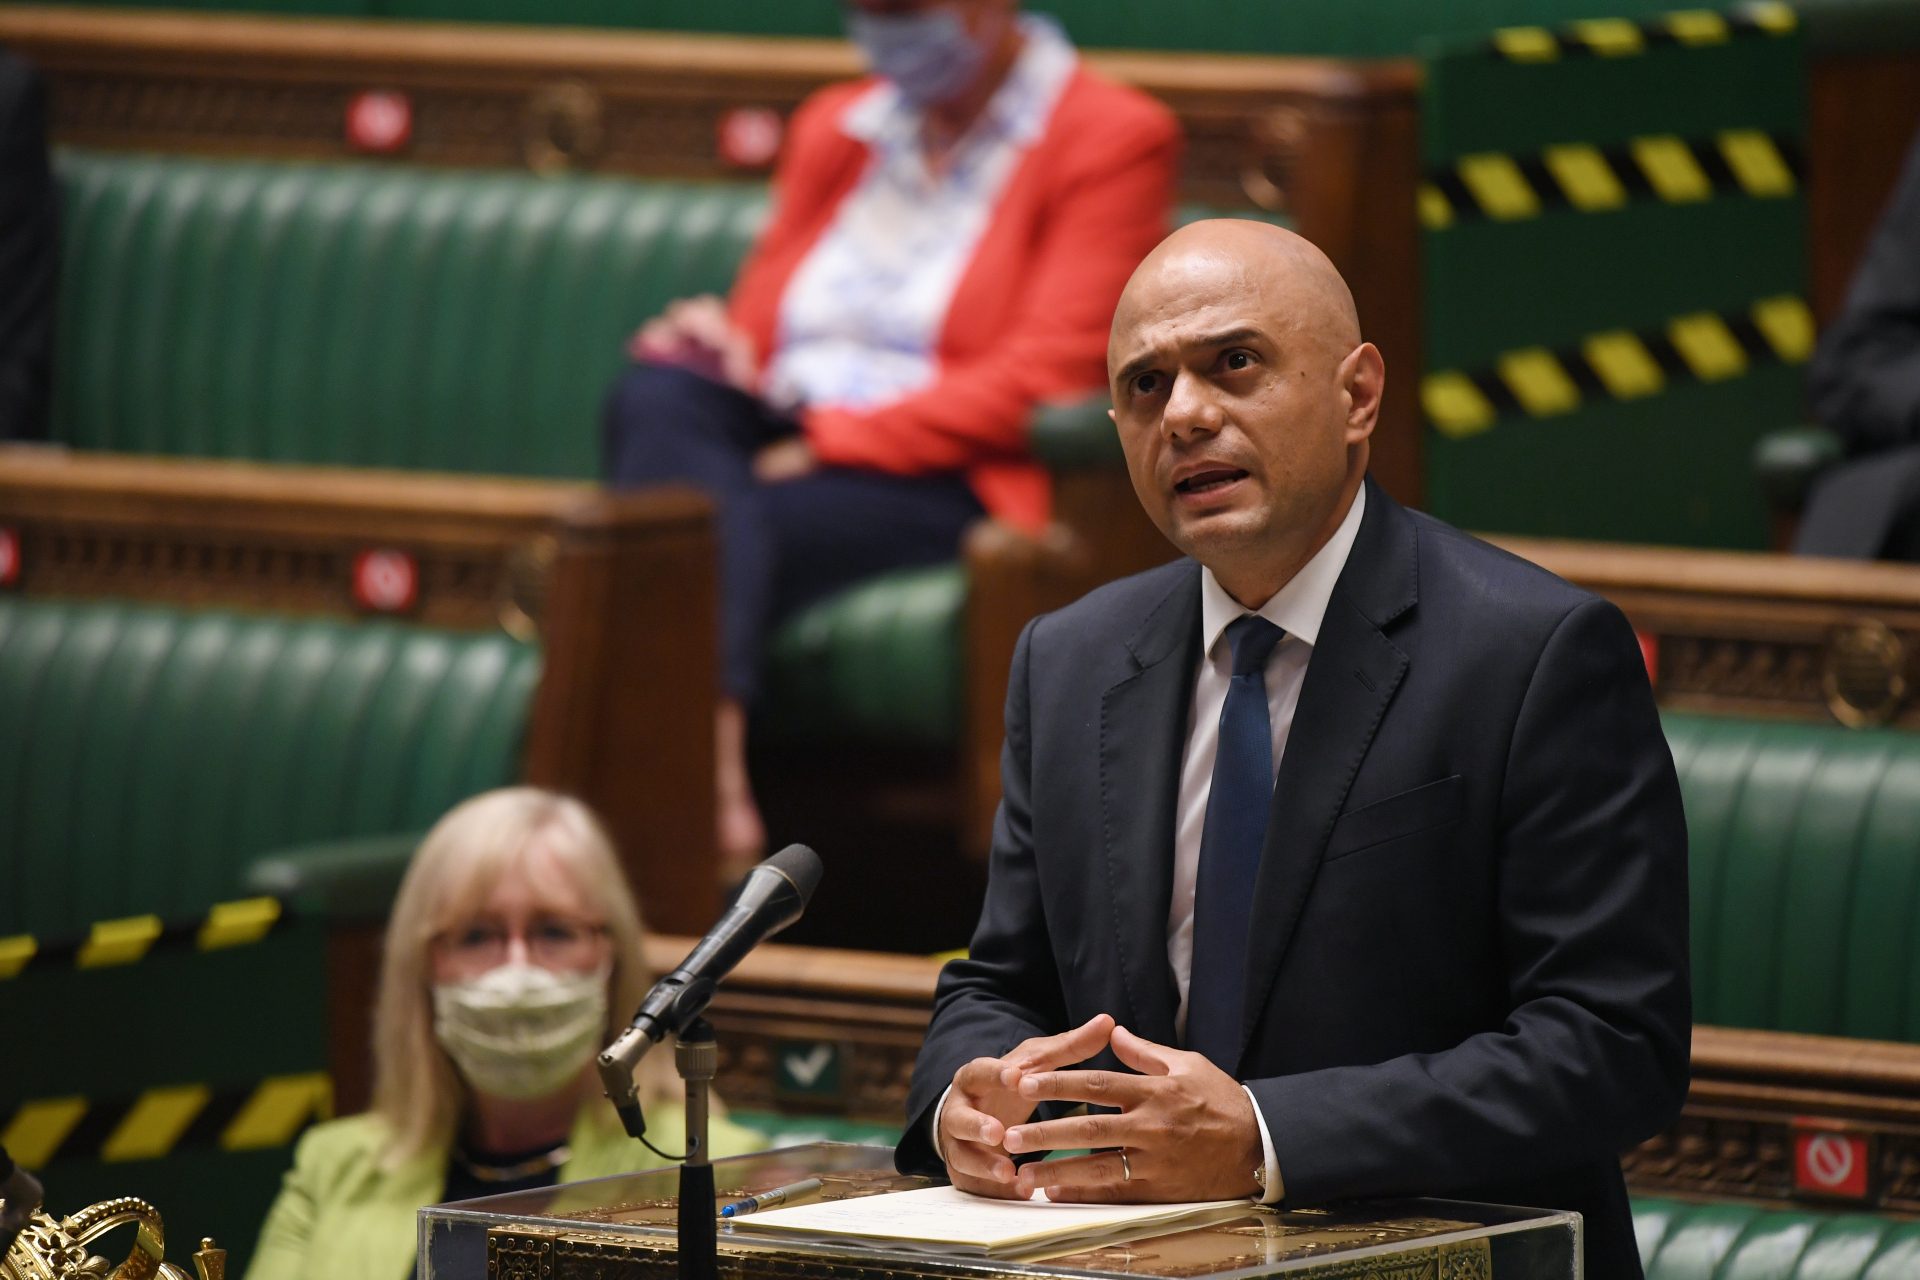 UK health minister Javid tests positive for COVID-19